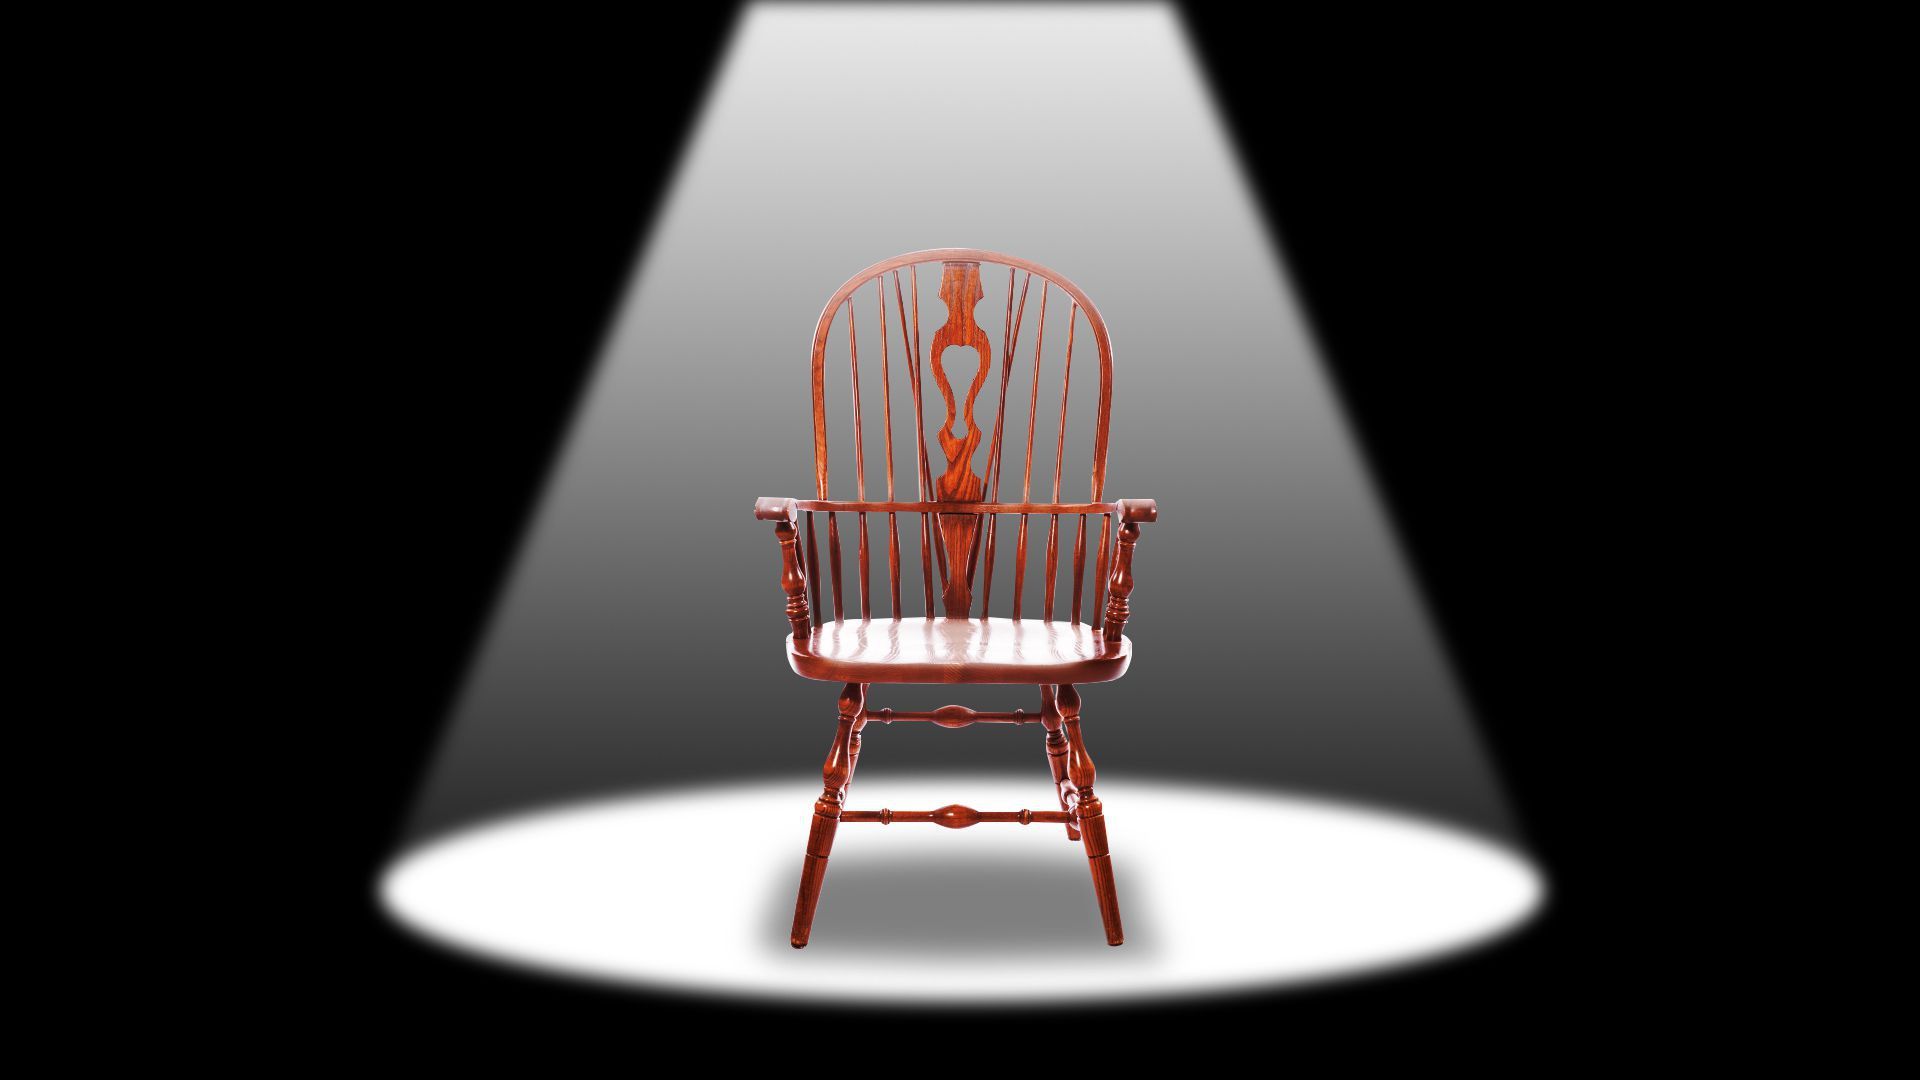 An illustration shows a red chair under a spotlight.